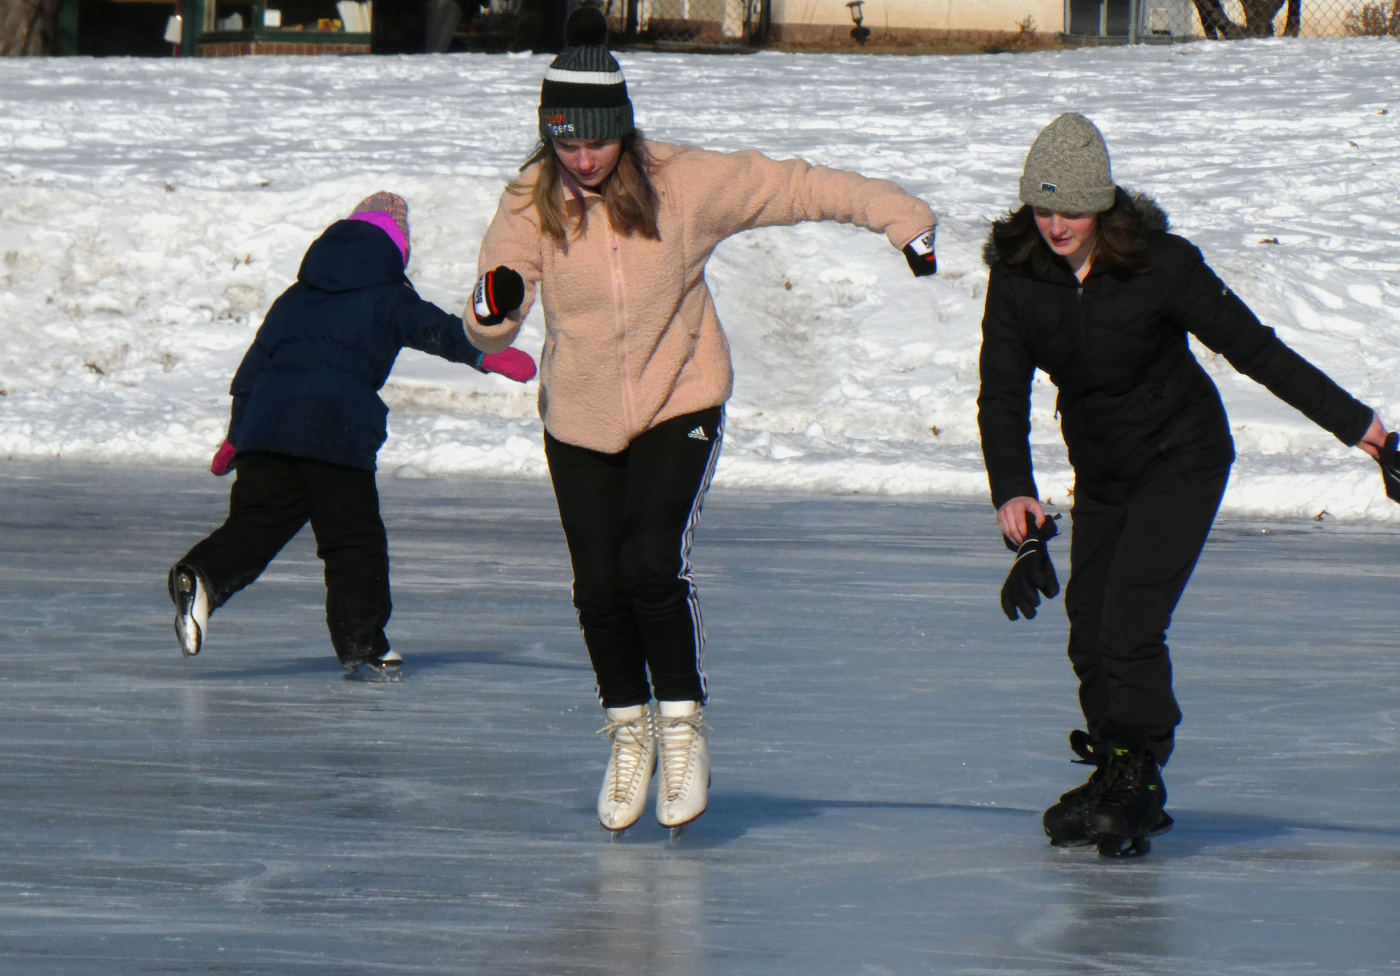 three young people ice skating, middle skater on toes